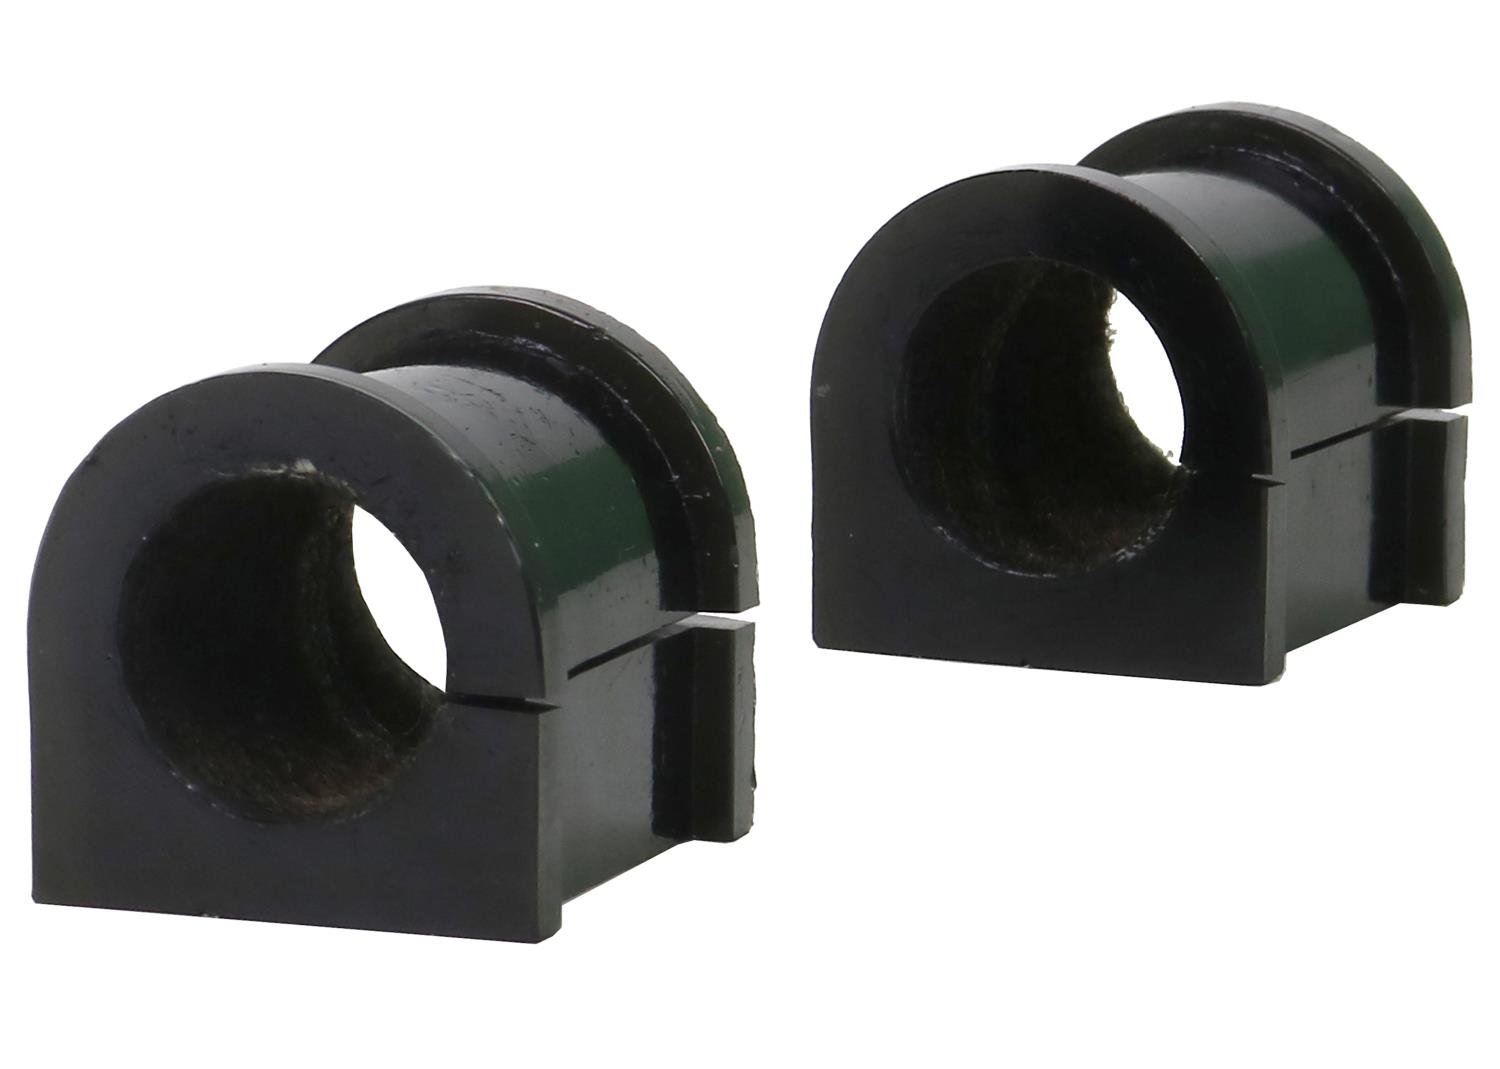 W21212G Sway Bar Mount Grease Free Bushing Fits Select Chevrolet, Chrysler, Ford, Mazda, Toyota Models